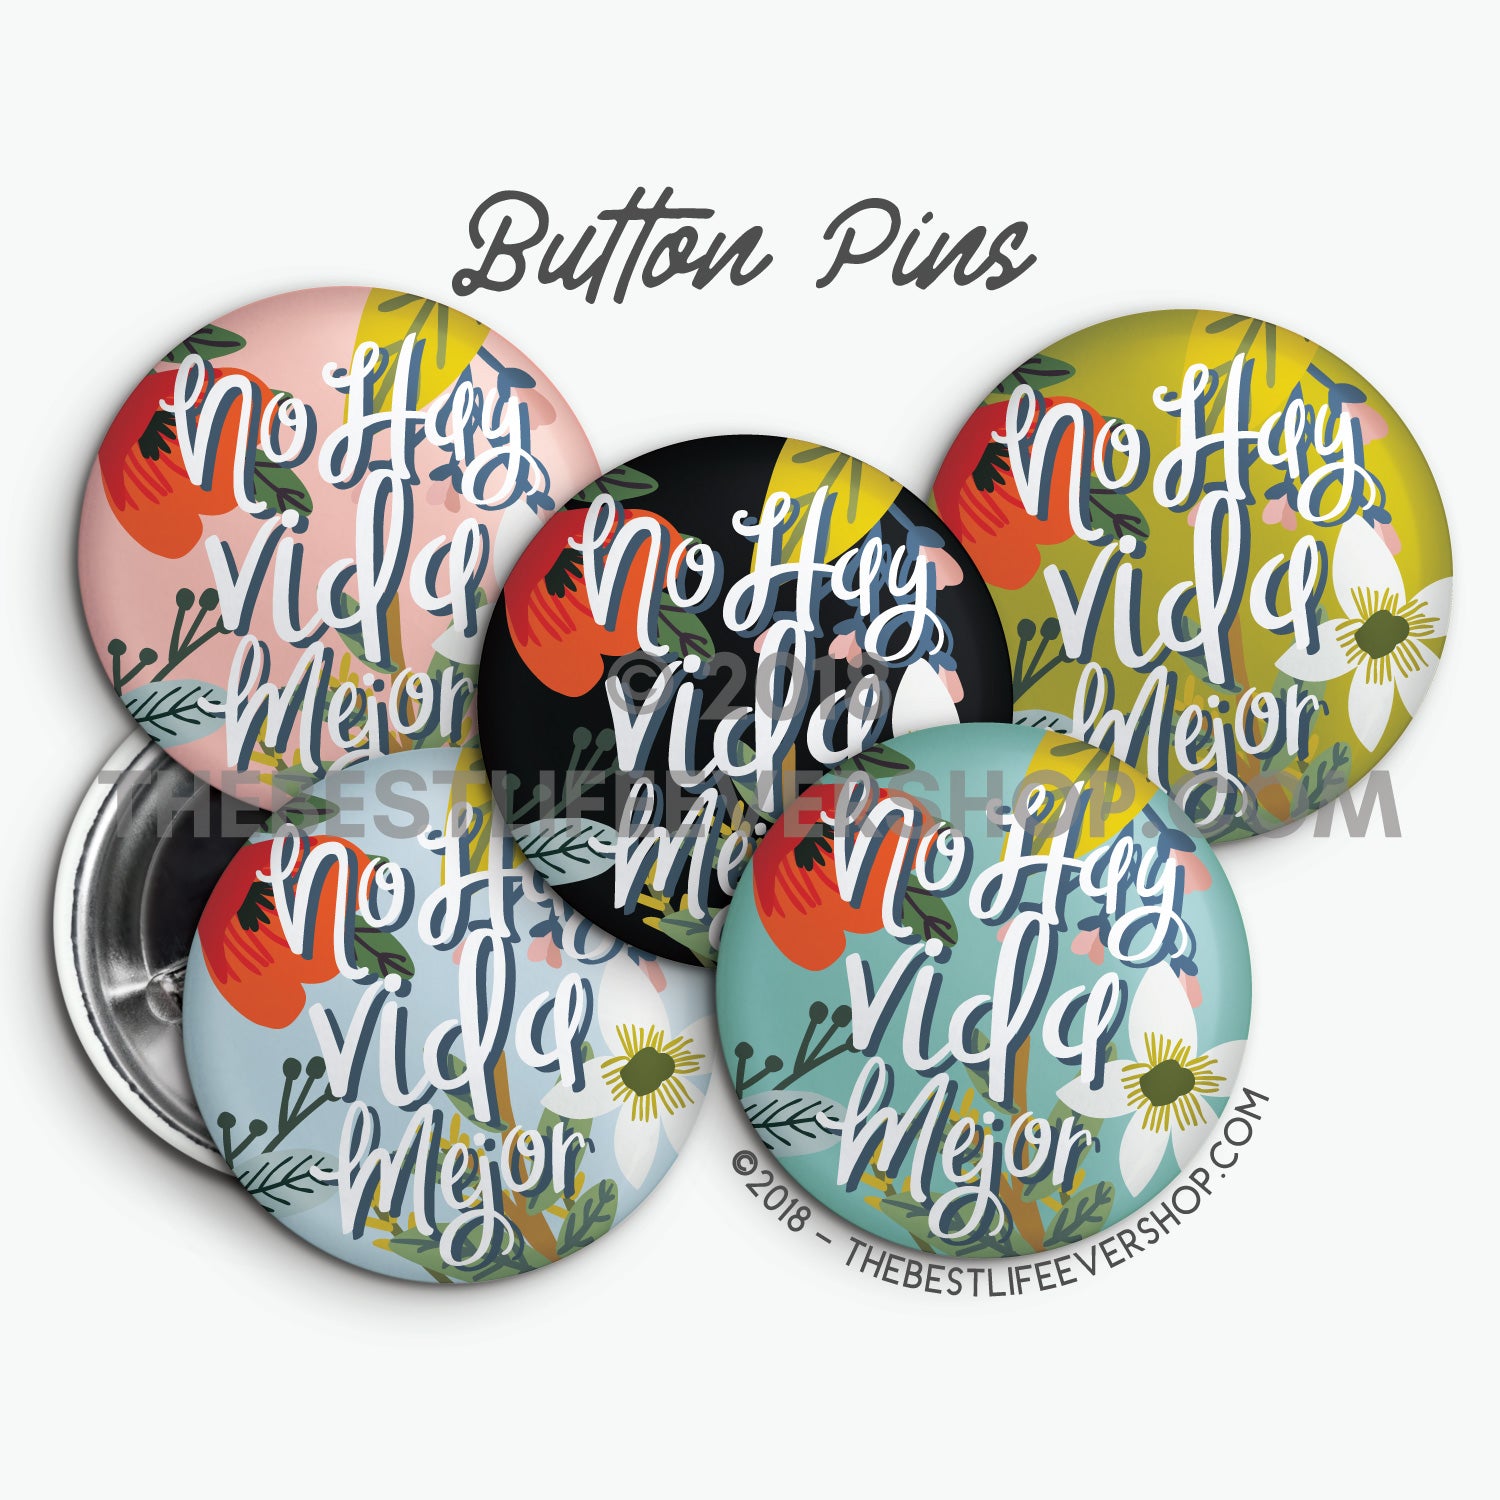 Best Life Ever FLORAL Button Pin Packs